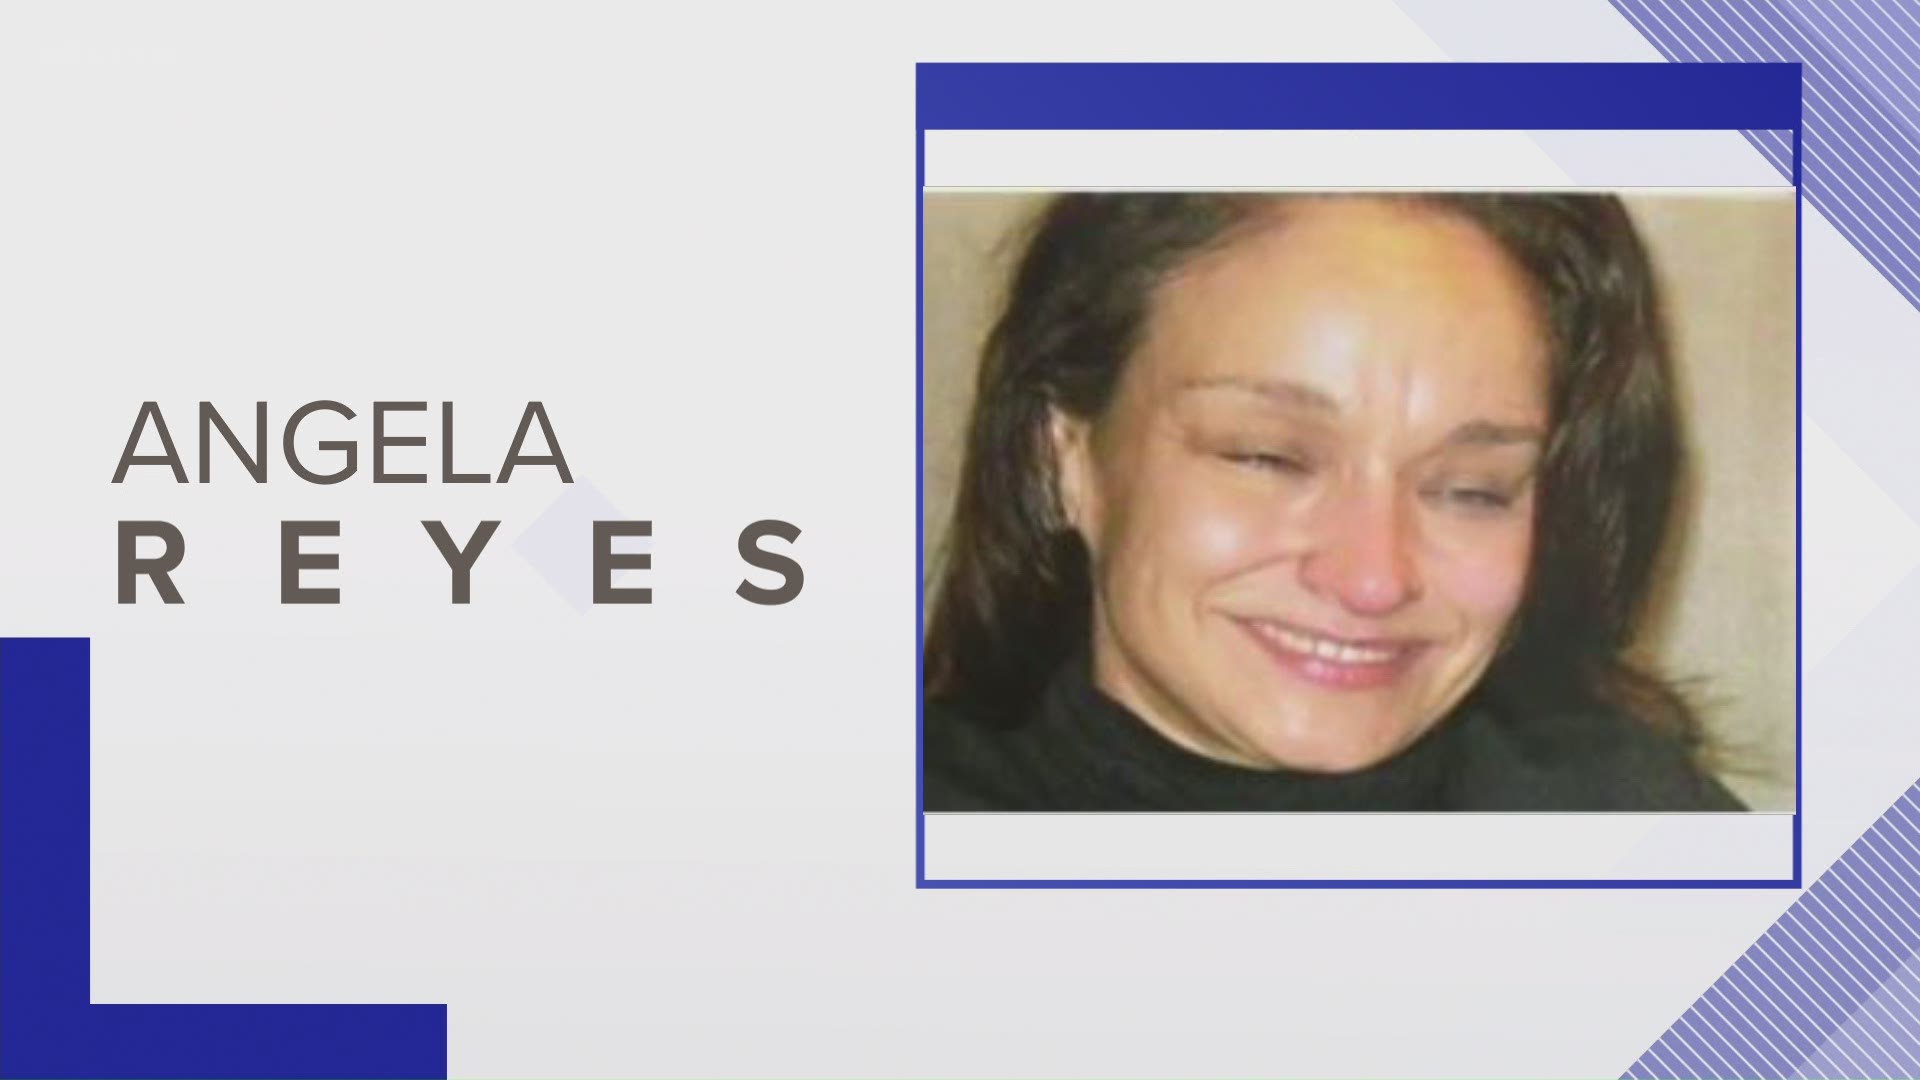 Angela Reyes, 44, was last seen at the Loves Truck Stop in the Summerton area of Clarendon County on September 6.